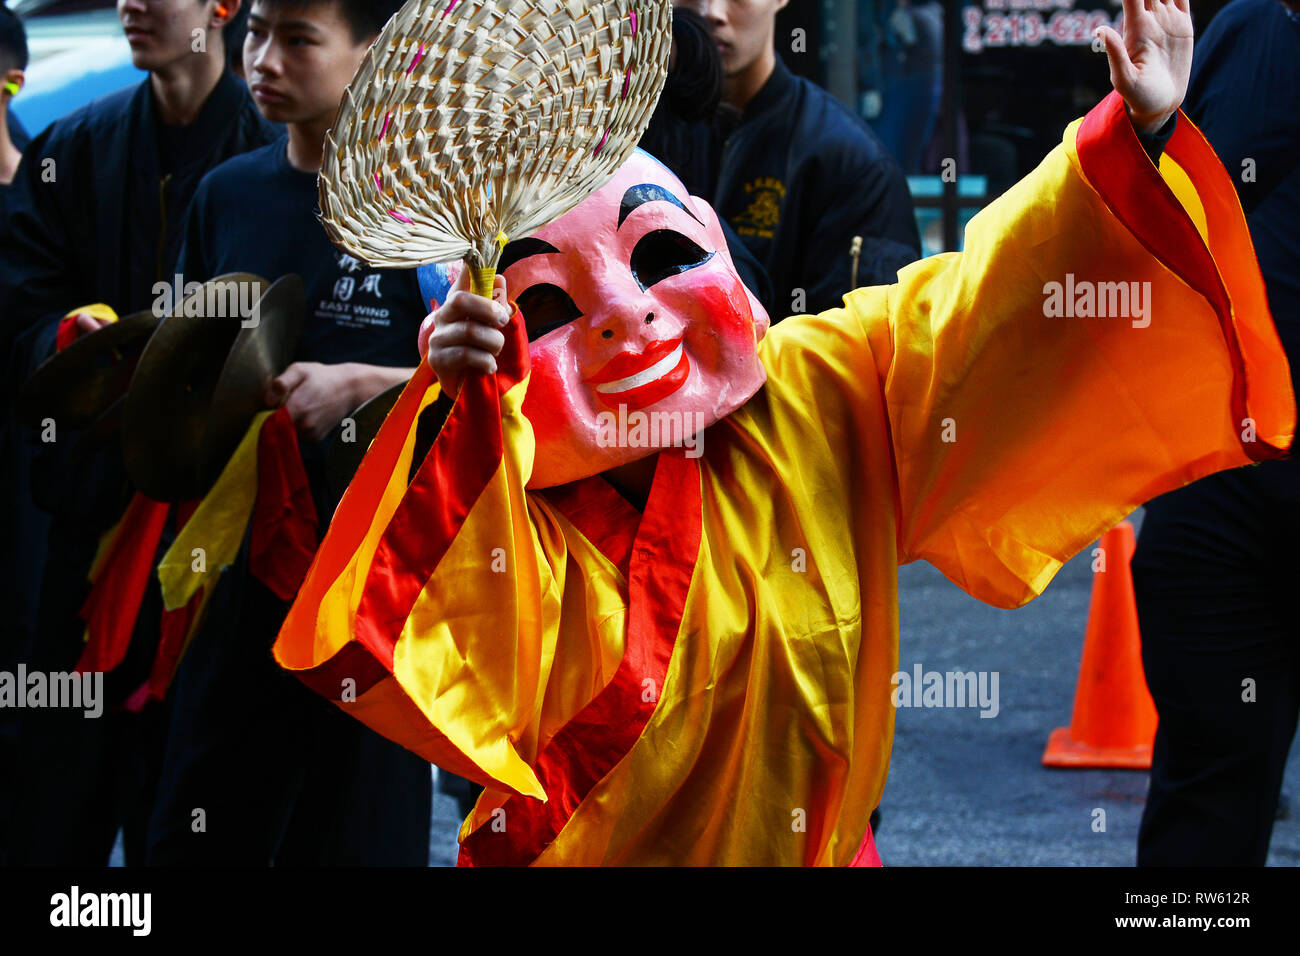 LOS ANGELES - FEBRUARY 9, 2019: Performer in costume at the Golden Dragon Parade, celebrating the Chinese New Year. Stock Photo